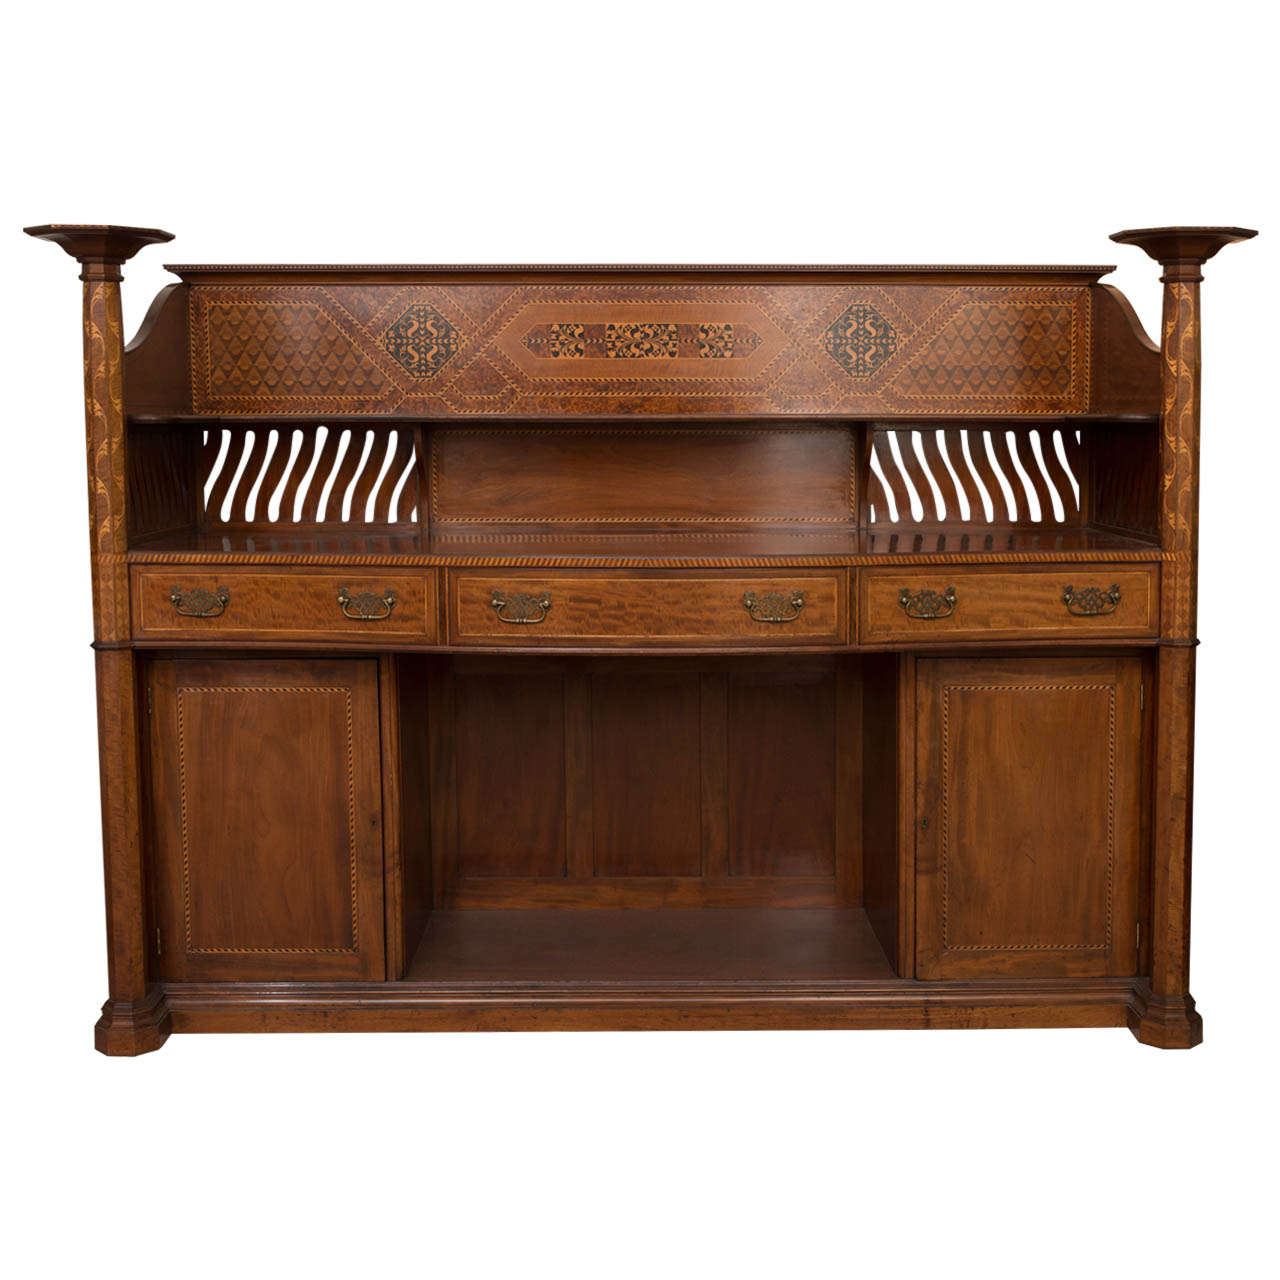 George Jack for Morris and co inlaid mahogany sideboard, England circa 1887 For Sale